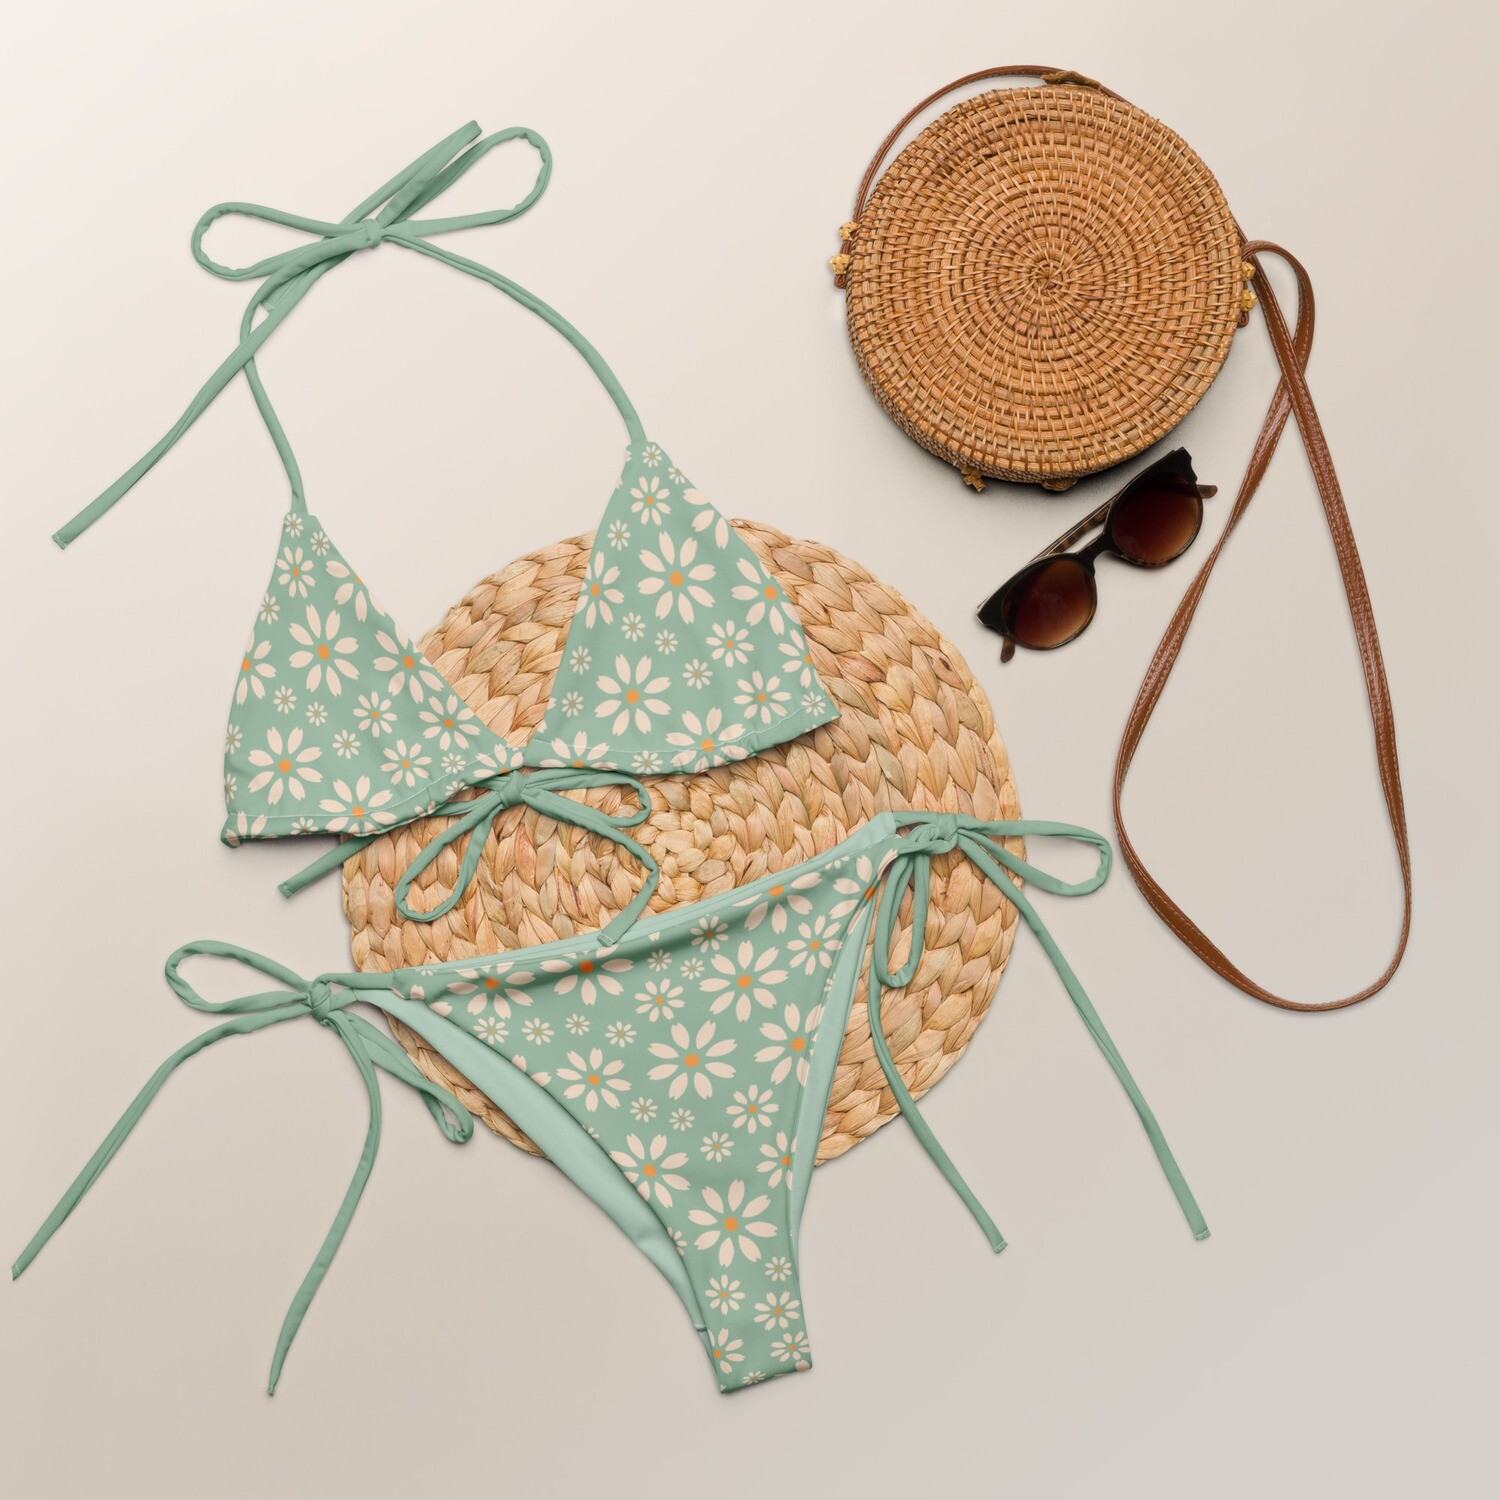 Pastel green recycled triangle bikini with retro floral daisy pattern in sizes 2XS-6XL